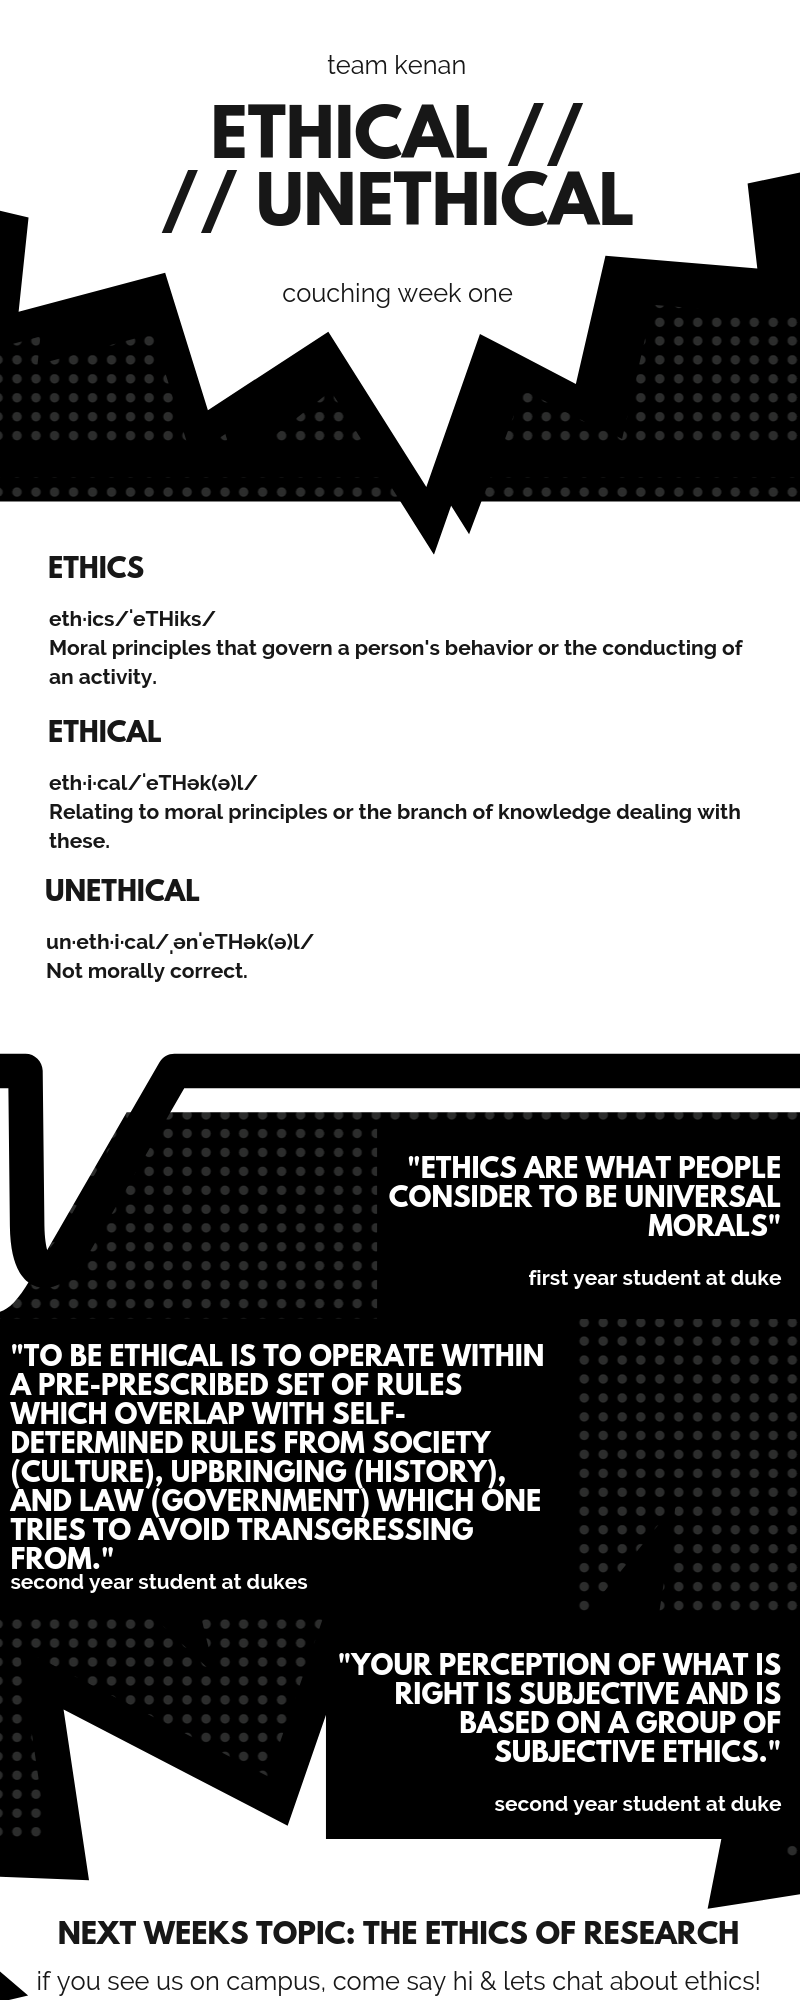 Team Kenan Ethical versus unethical schedule and quotes